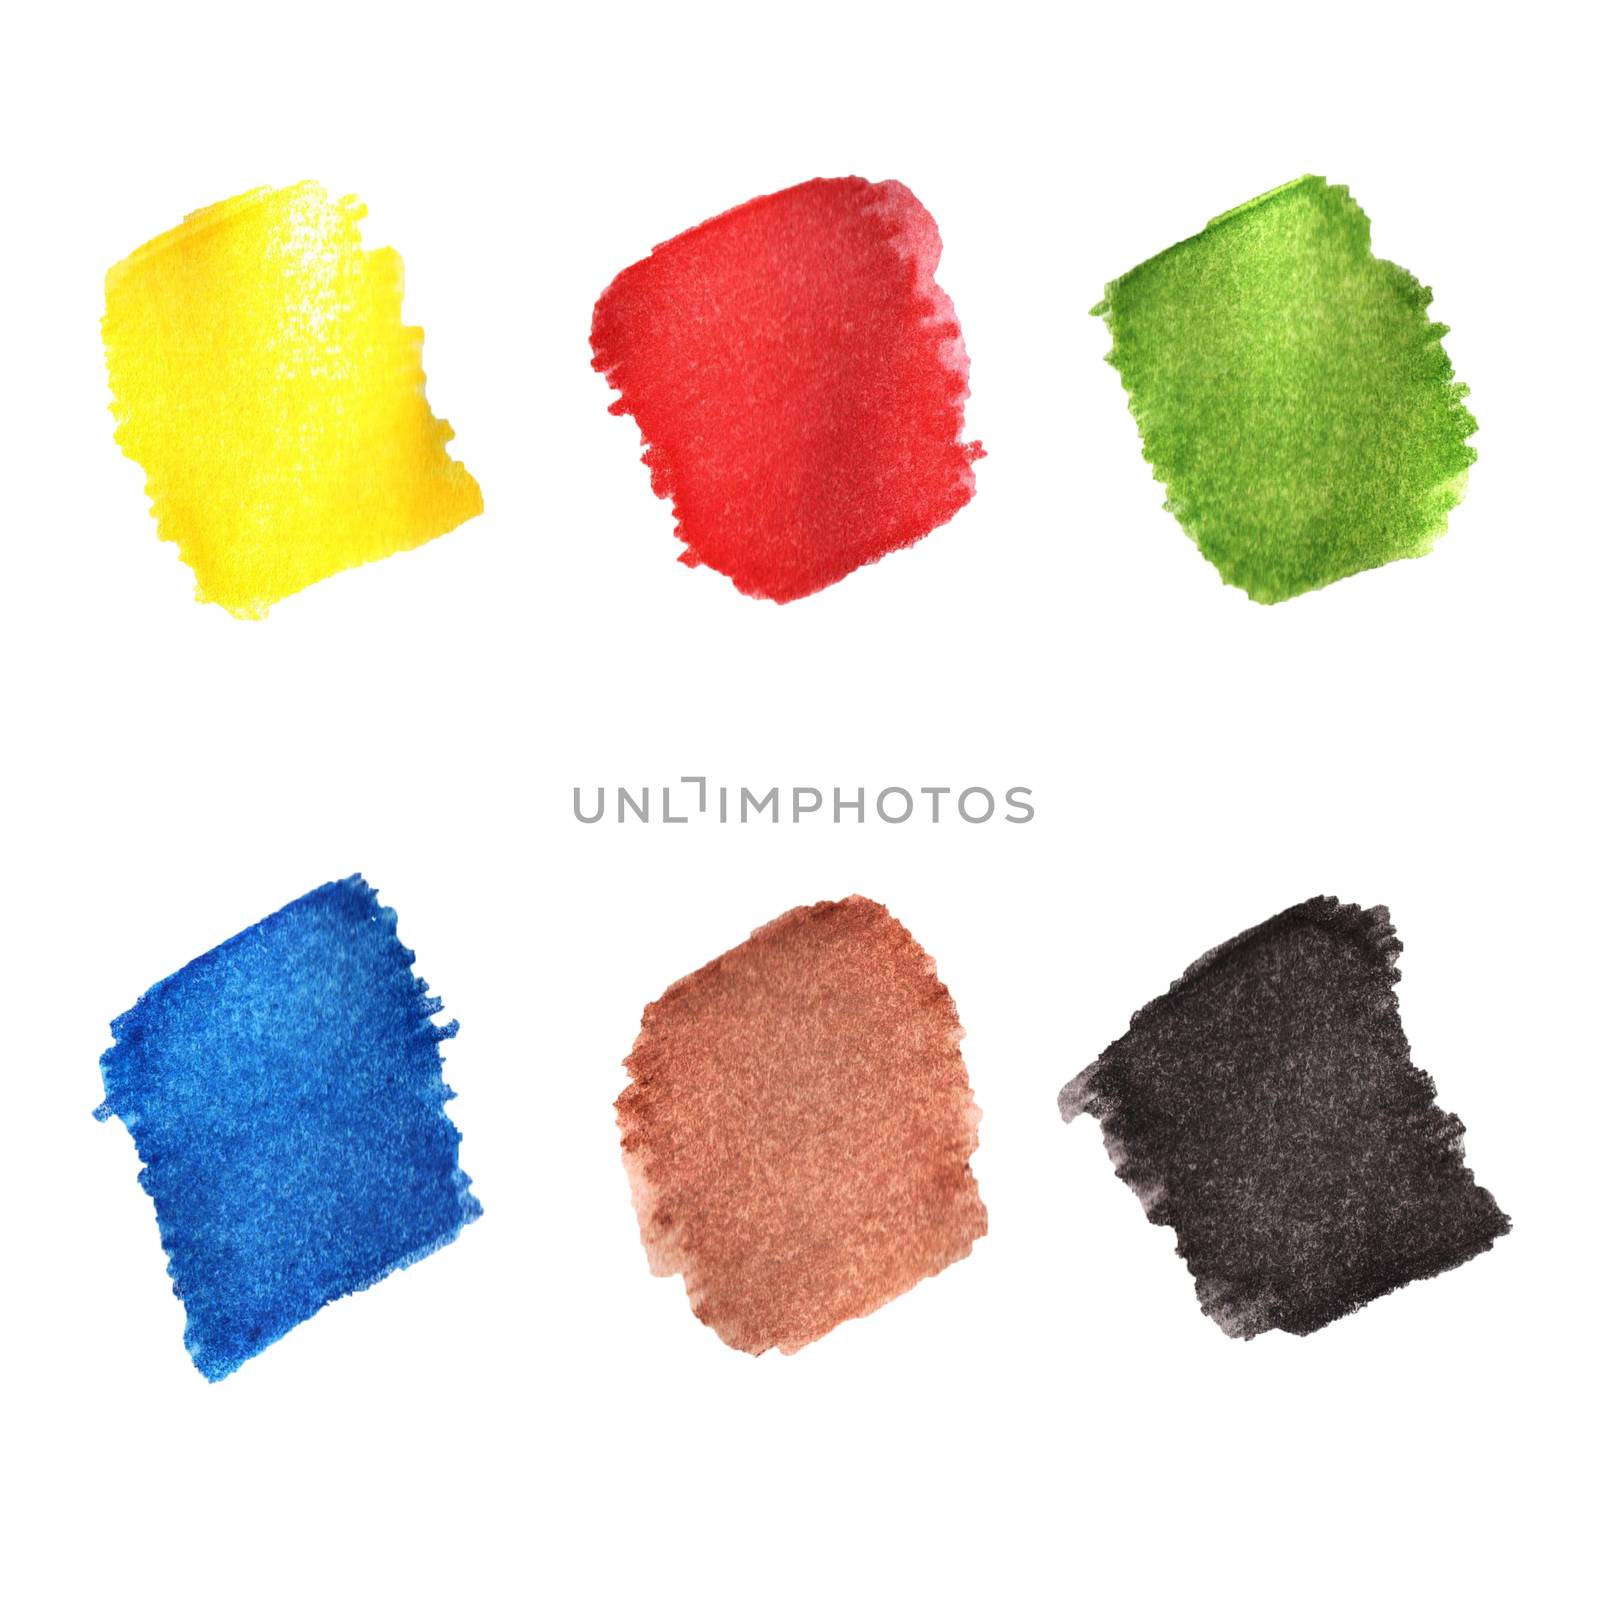 Isolated spots of watercolored pencils on a white background. Six basic colors - yellow, red, green, blue, brown and black.